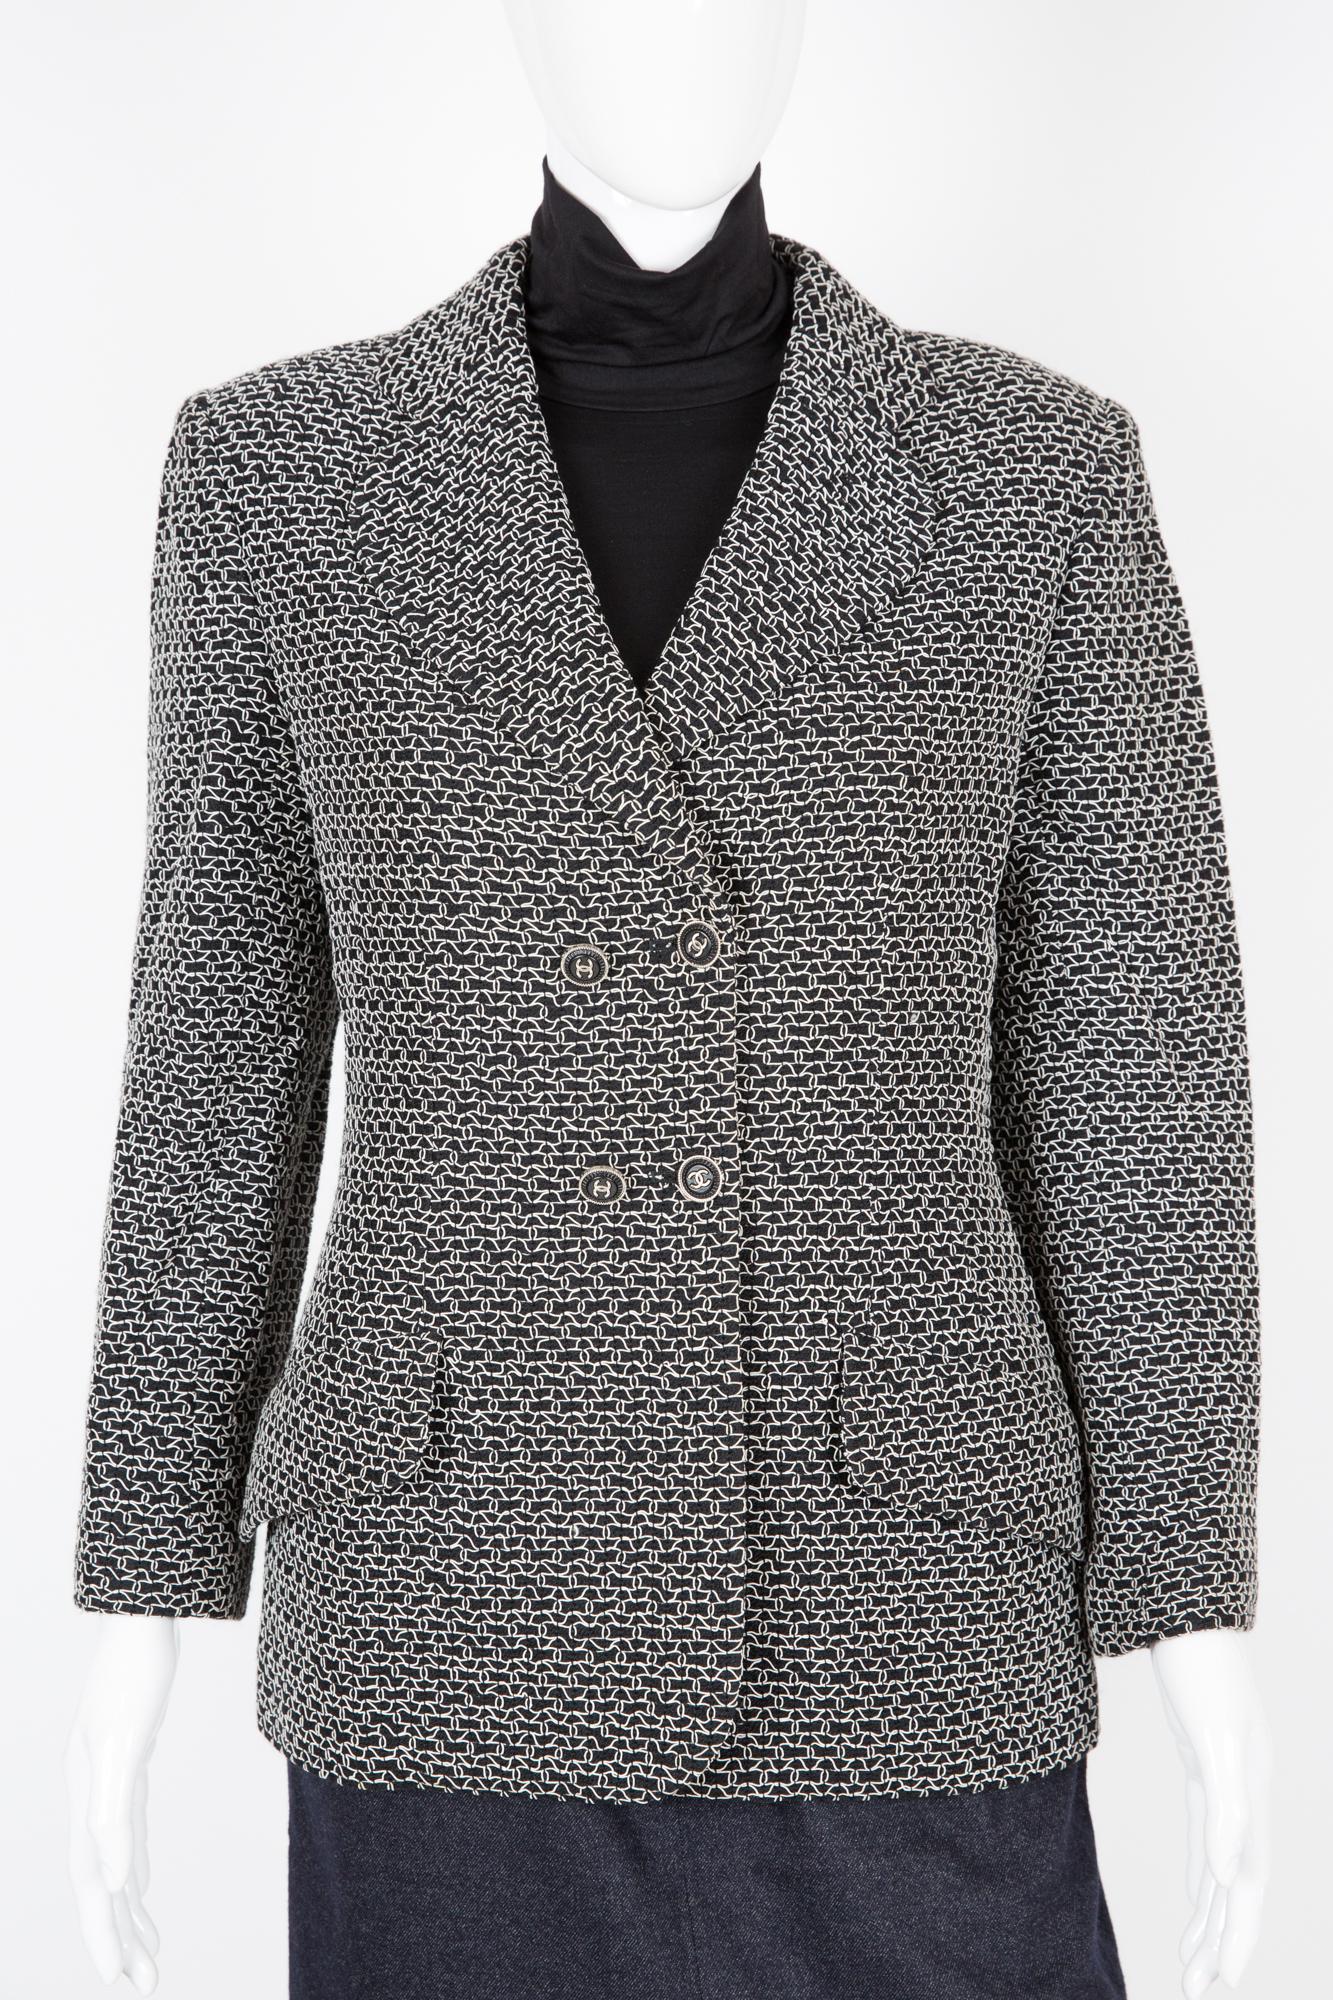 Women's 1998 Chanel Black Tweed Breasted Jacket For Sale